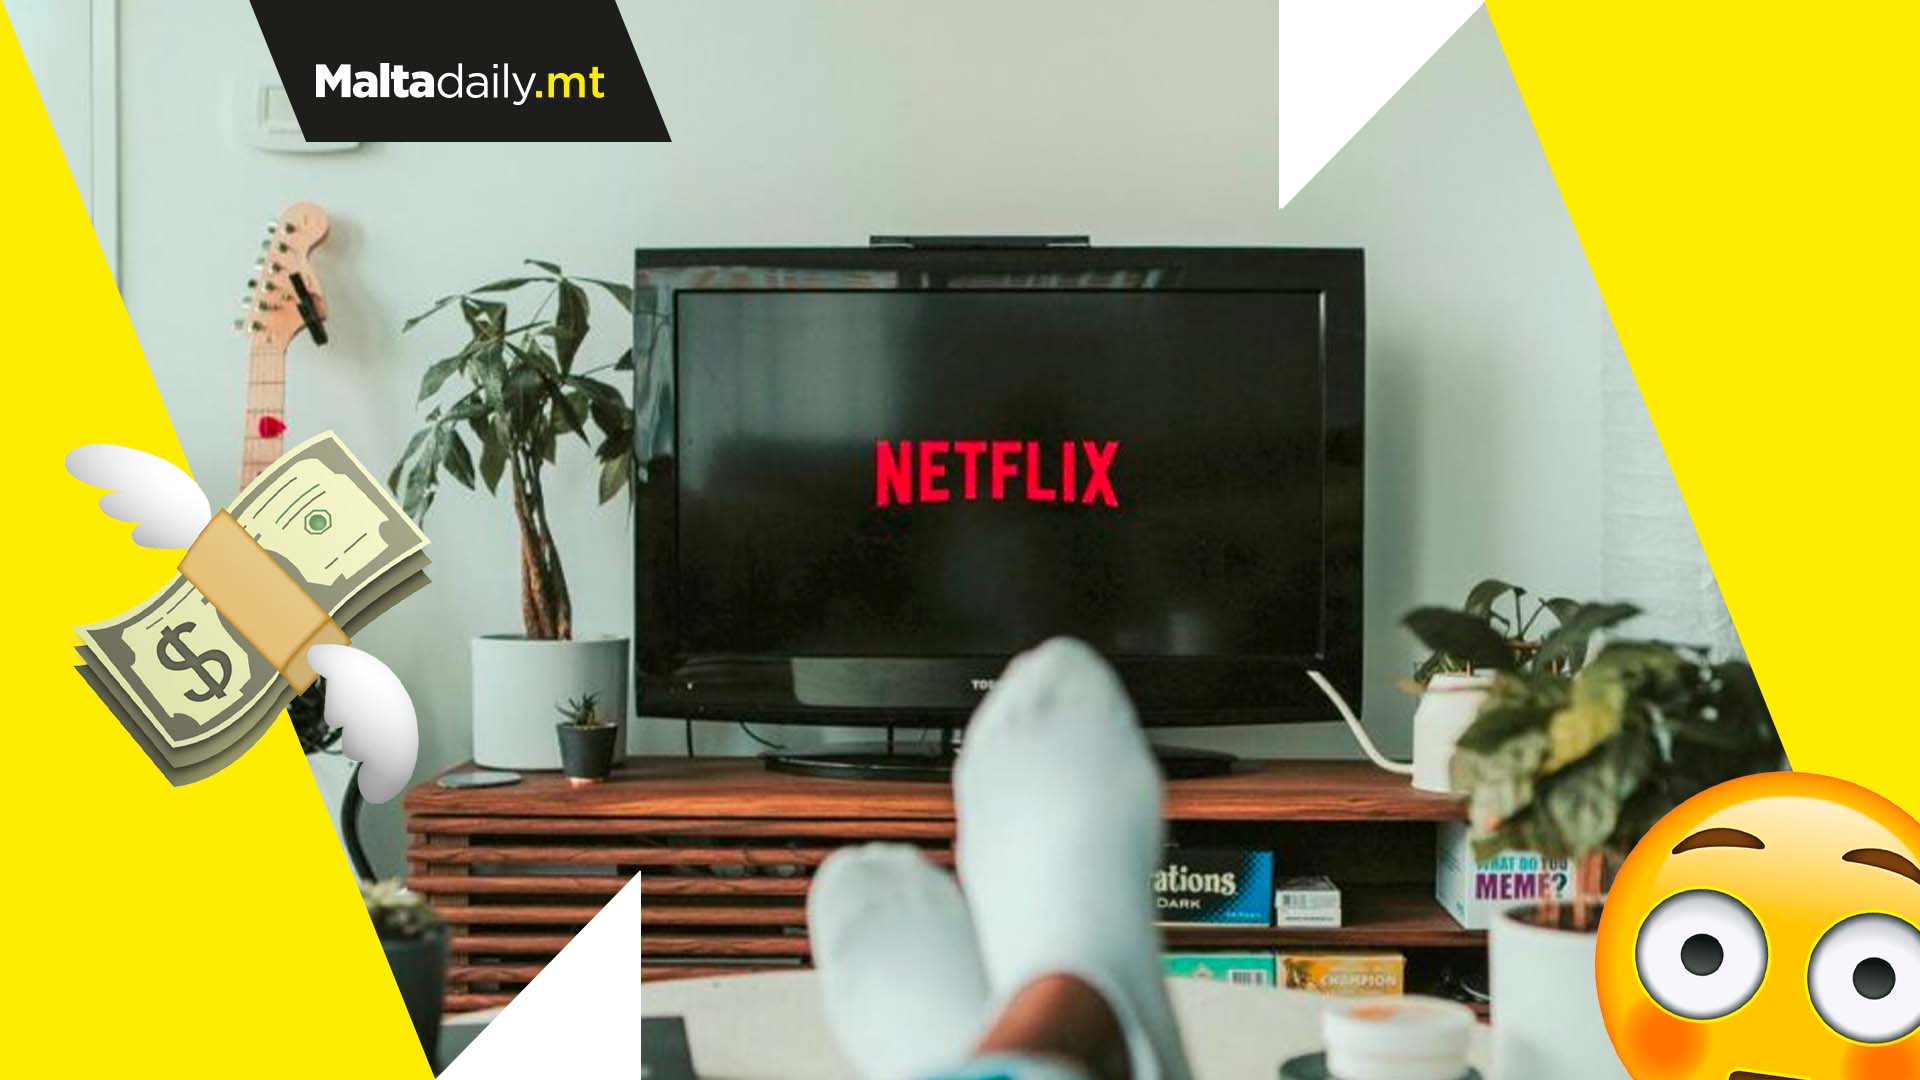 People planning to cancel Netflix due to price increases and new platforms